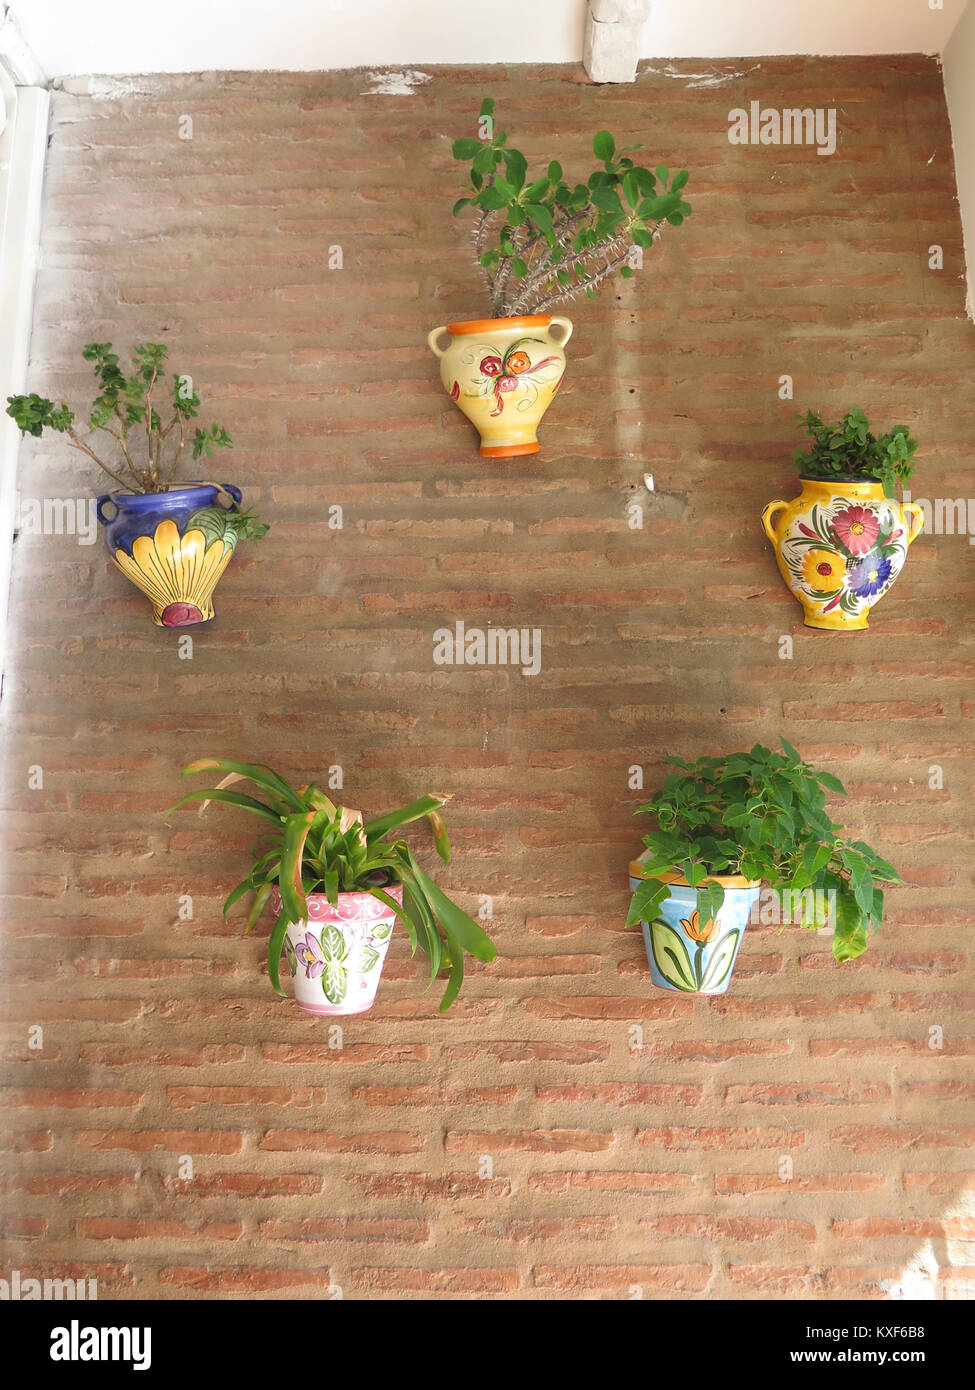 Andalusian Flower pots hanging on Brick Wall Stock Photo